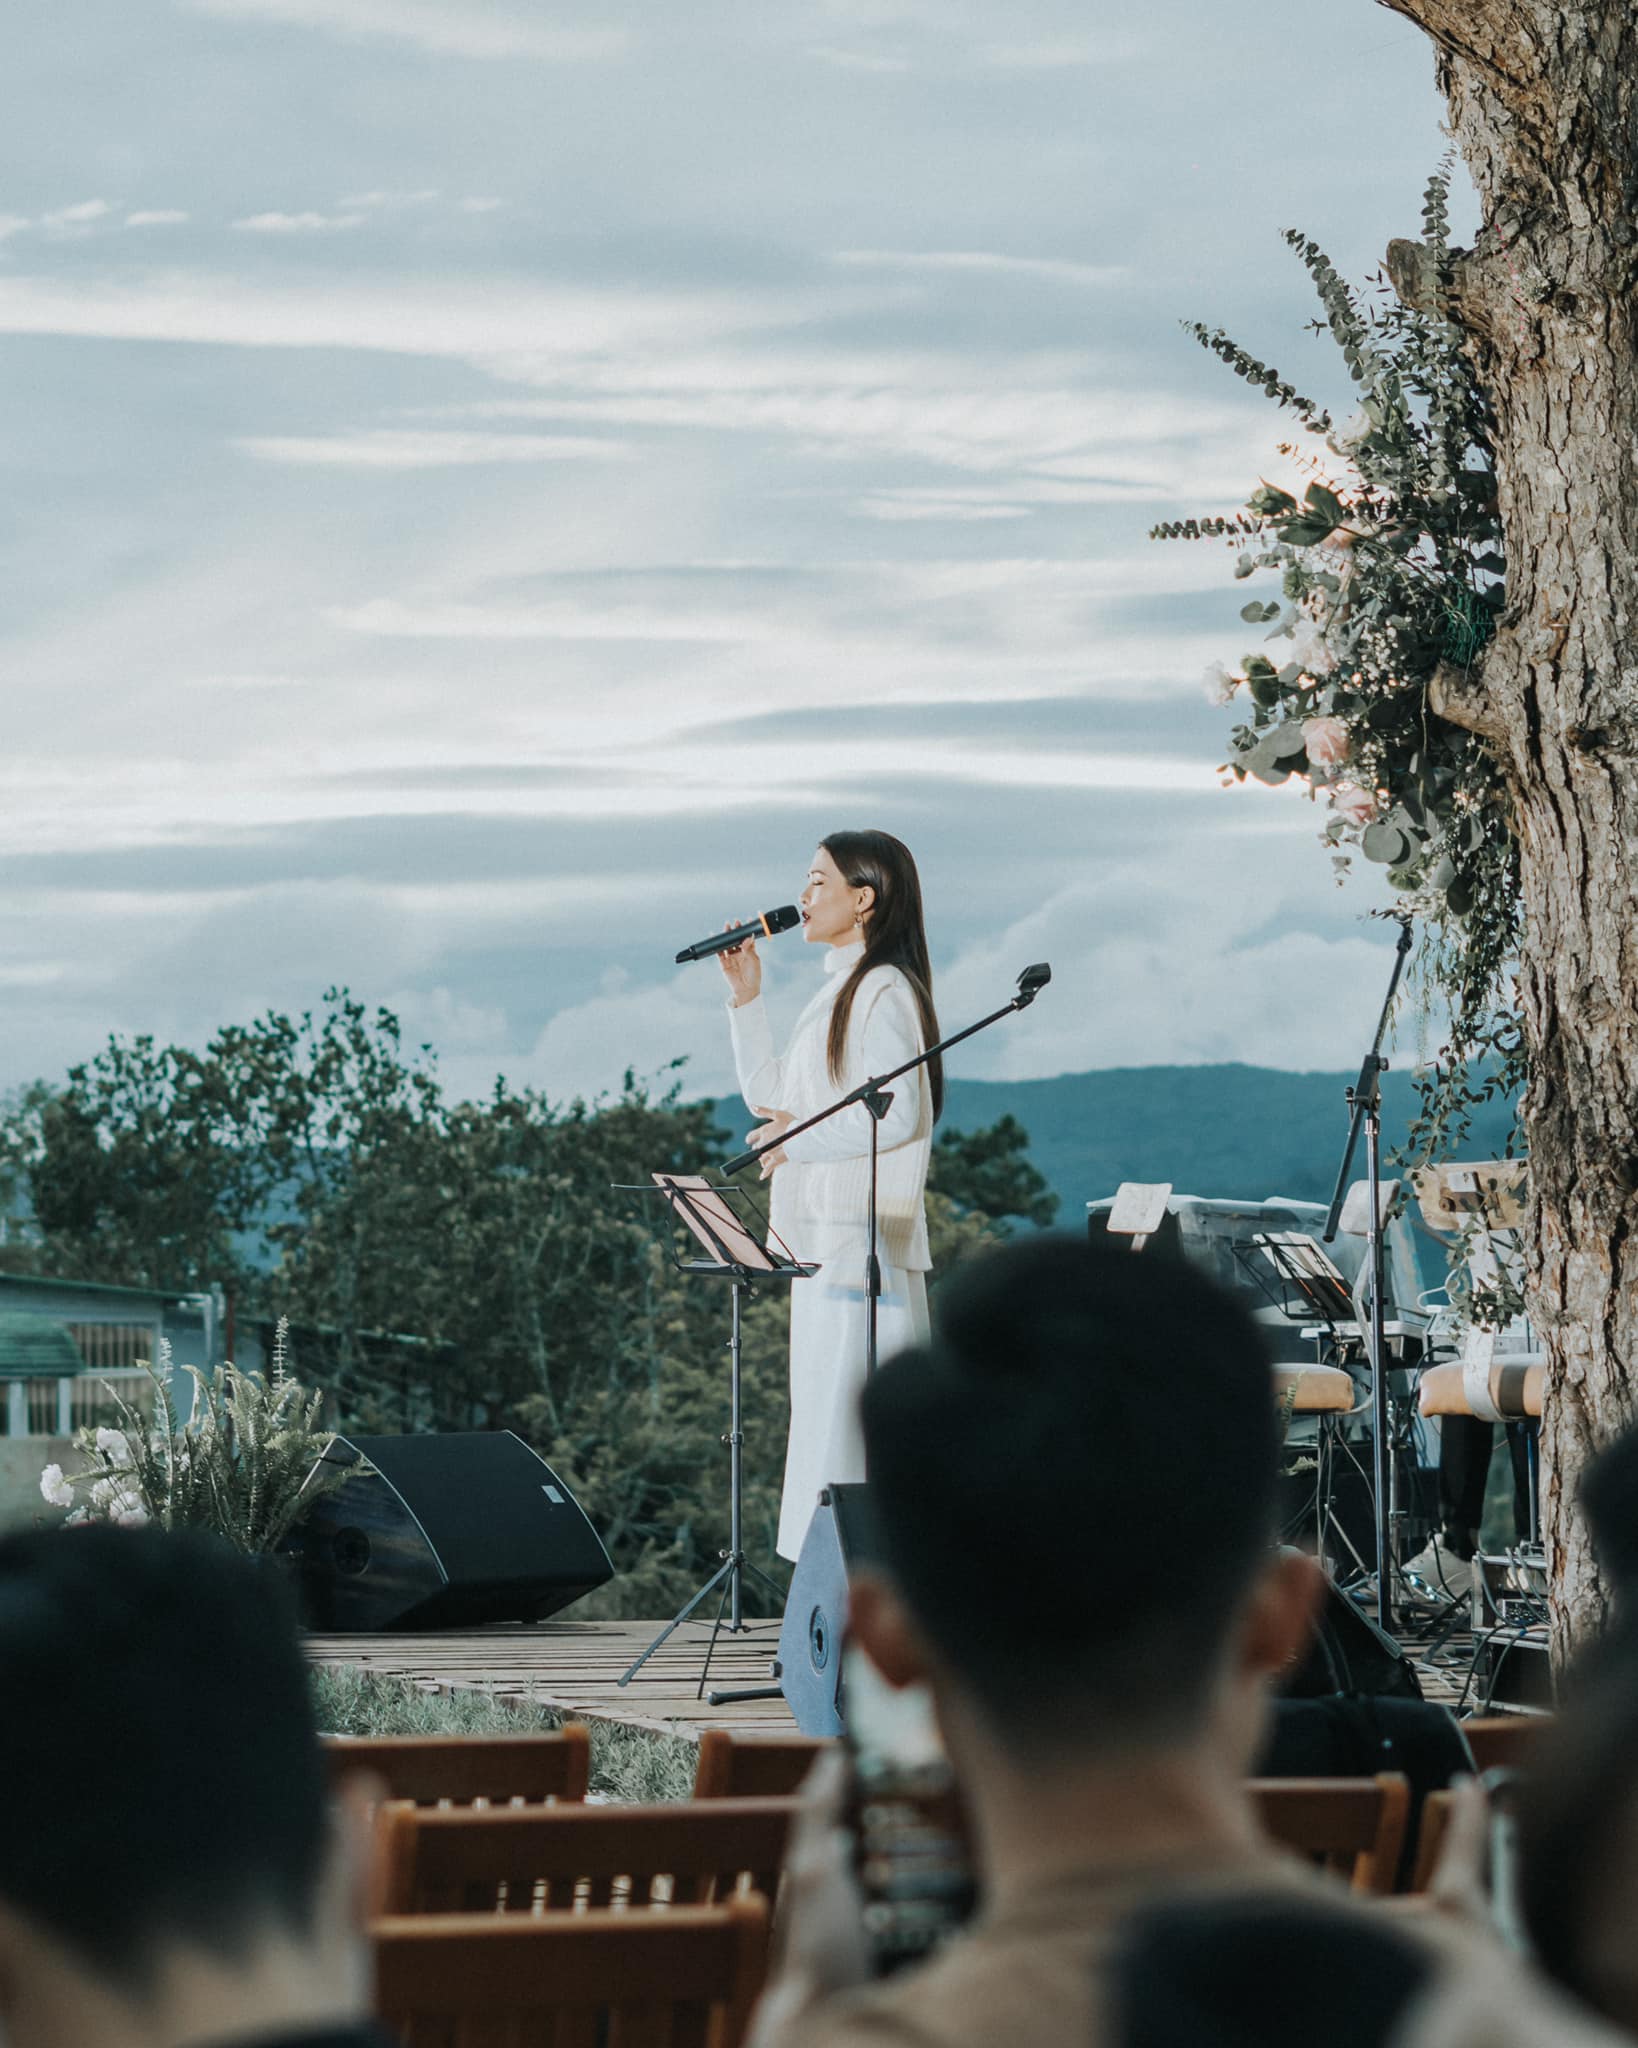 A-list star singers pull together to Da Lat to make concerts: Traveling experience combined with listening to music is very HOT in the land of thousands of pine!  - Photo 5.